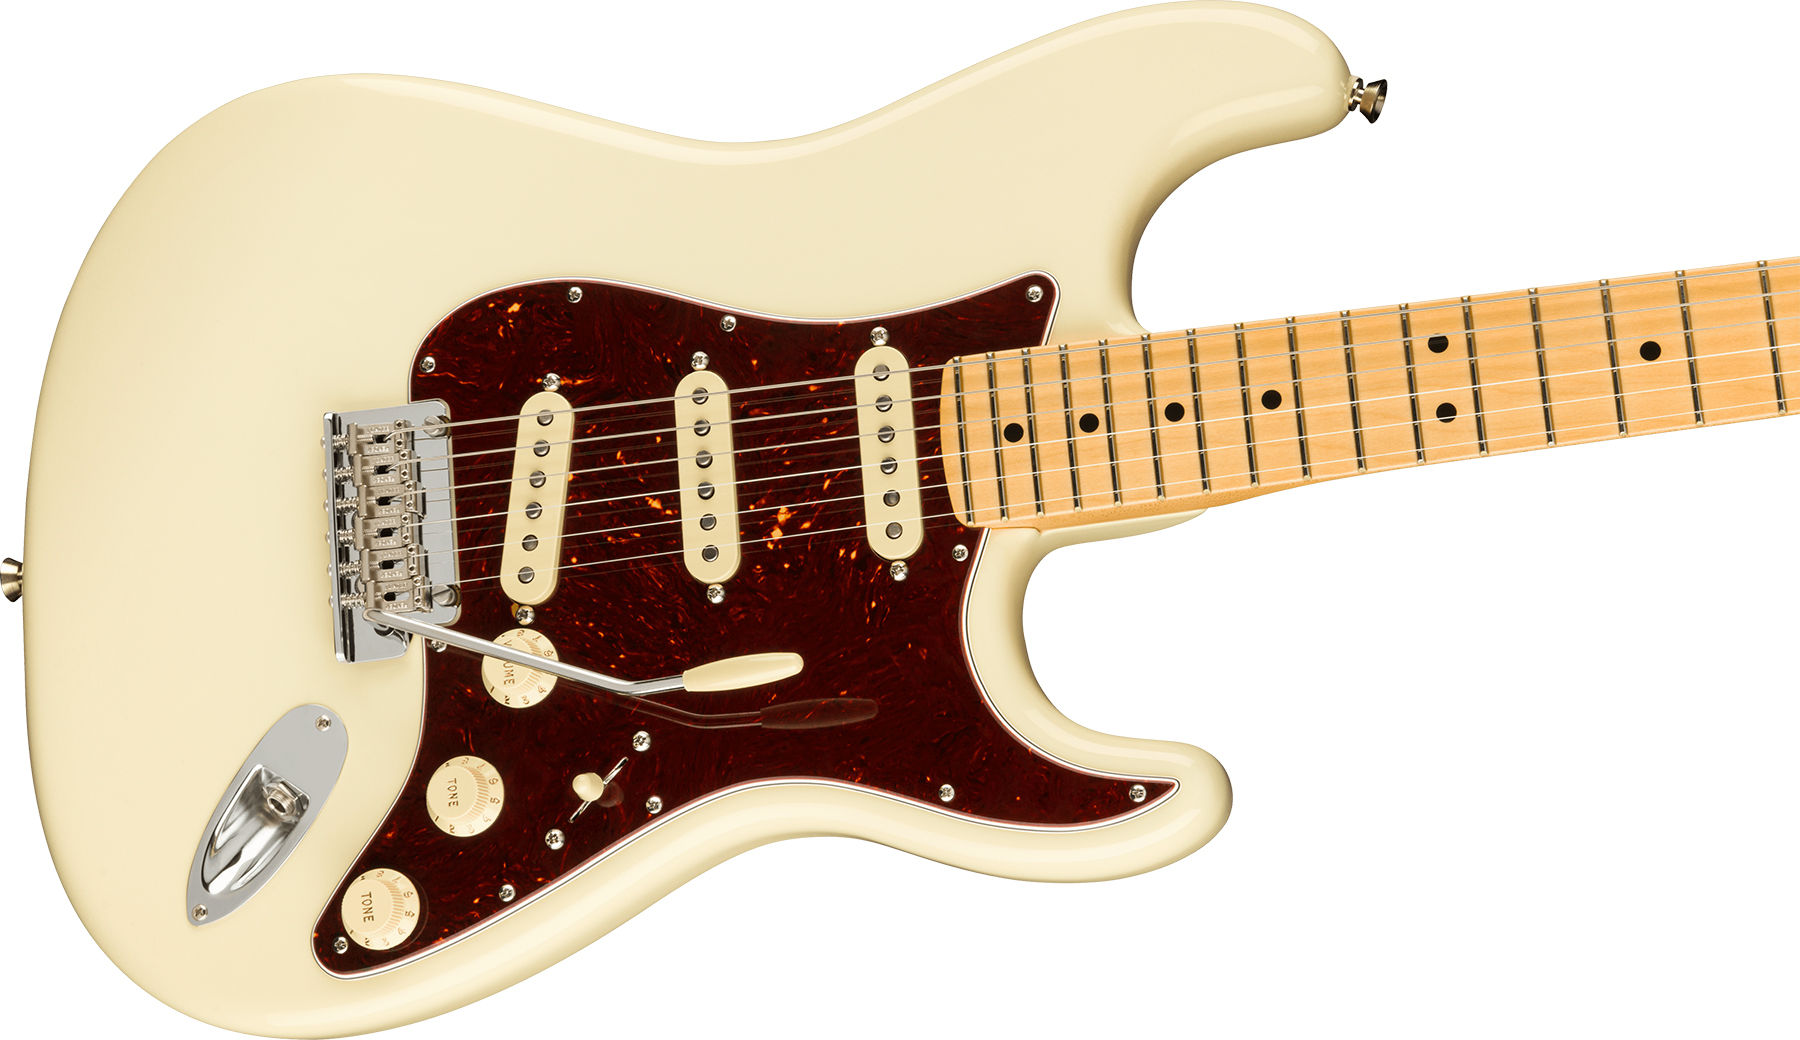 Fender Strat American Professional Ii Usa Mn - Olympic White - Guitare Électrique Forme Str - Variation 2